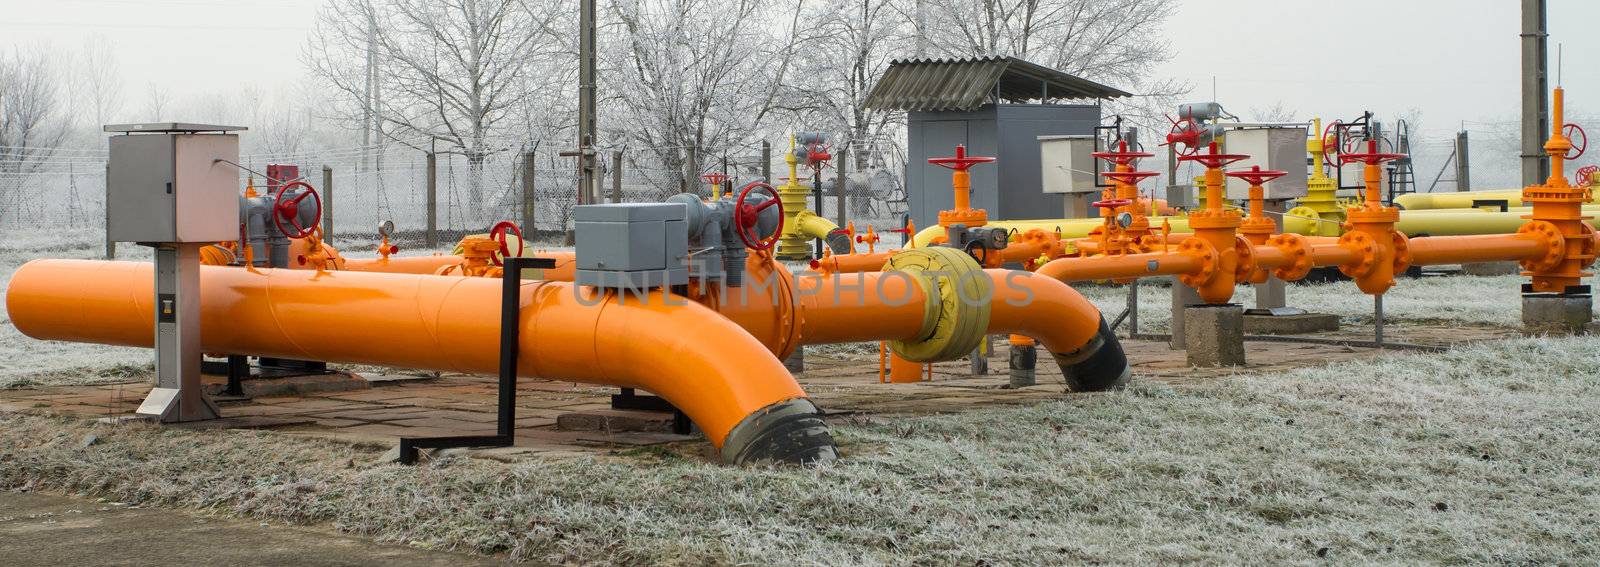 orange gas pipe in frosted winter